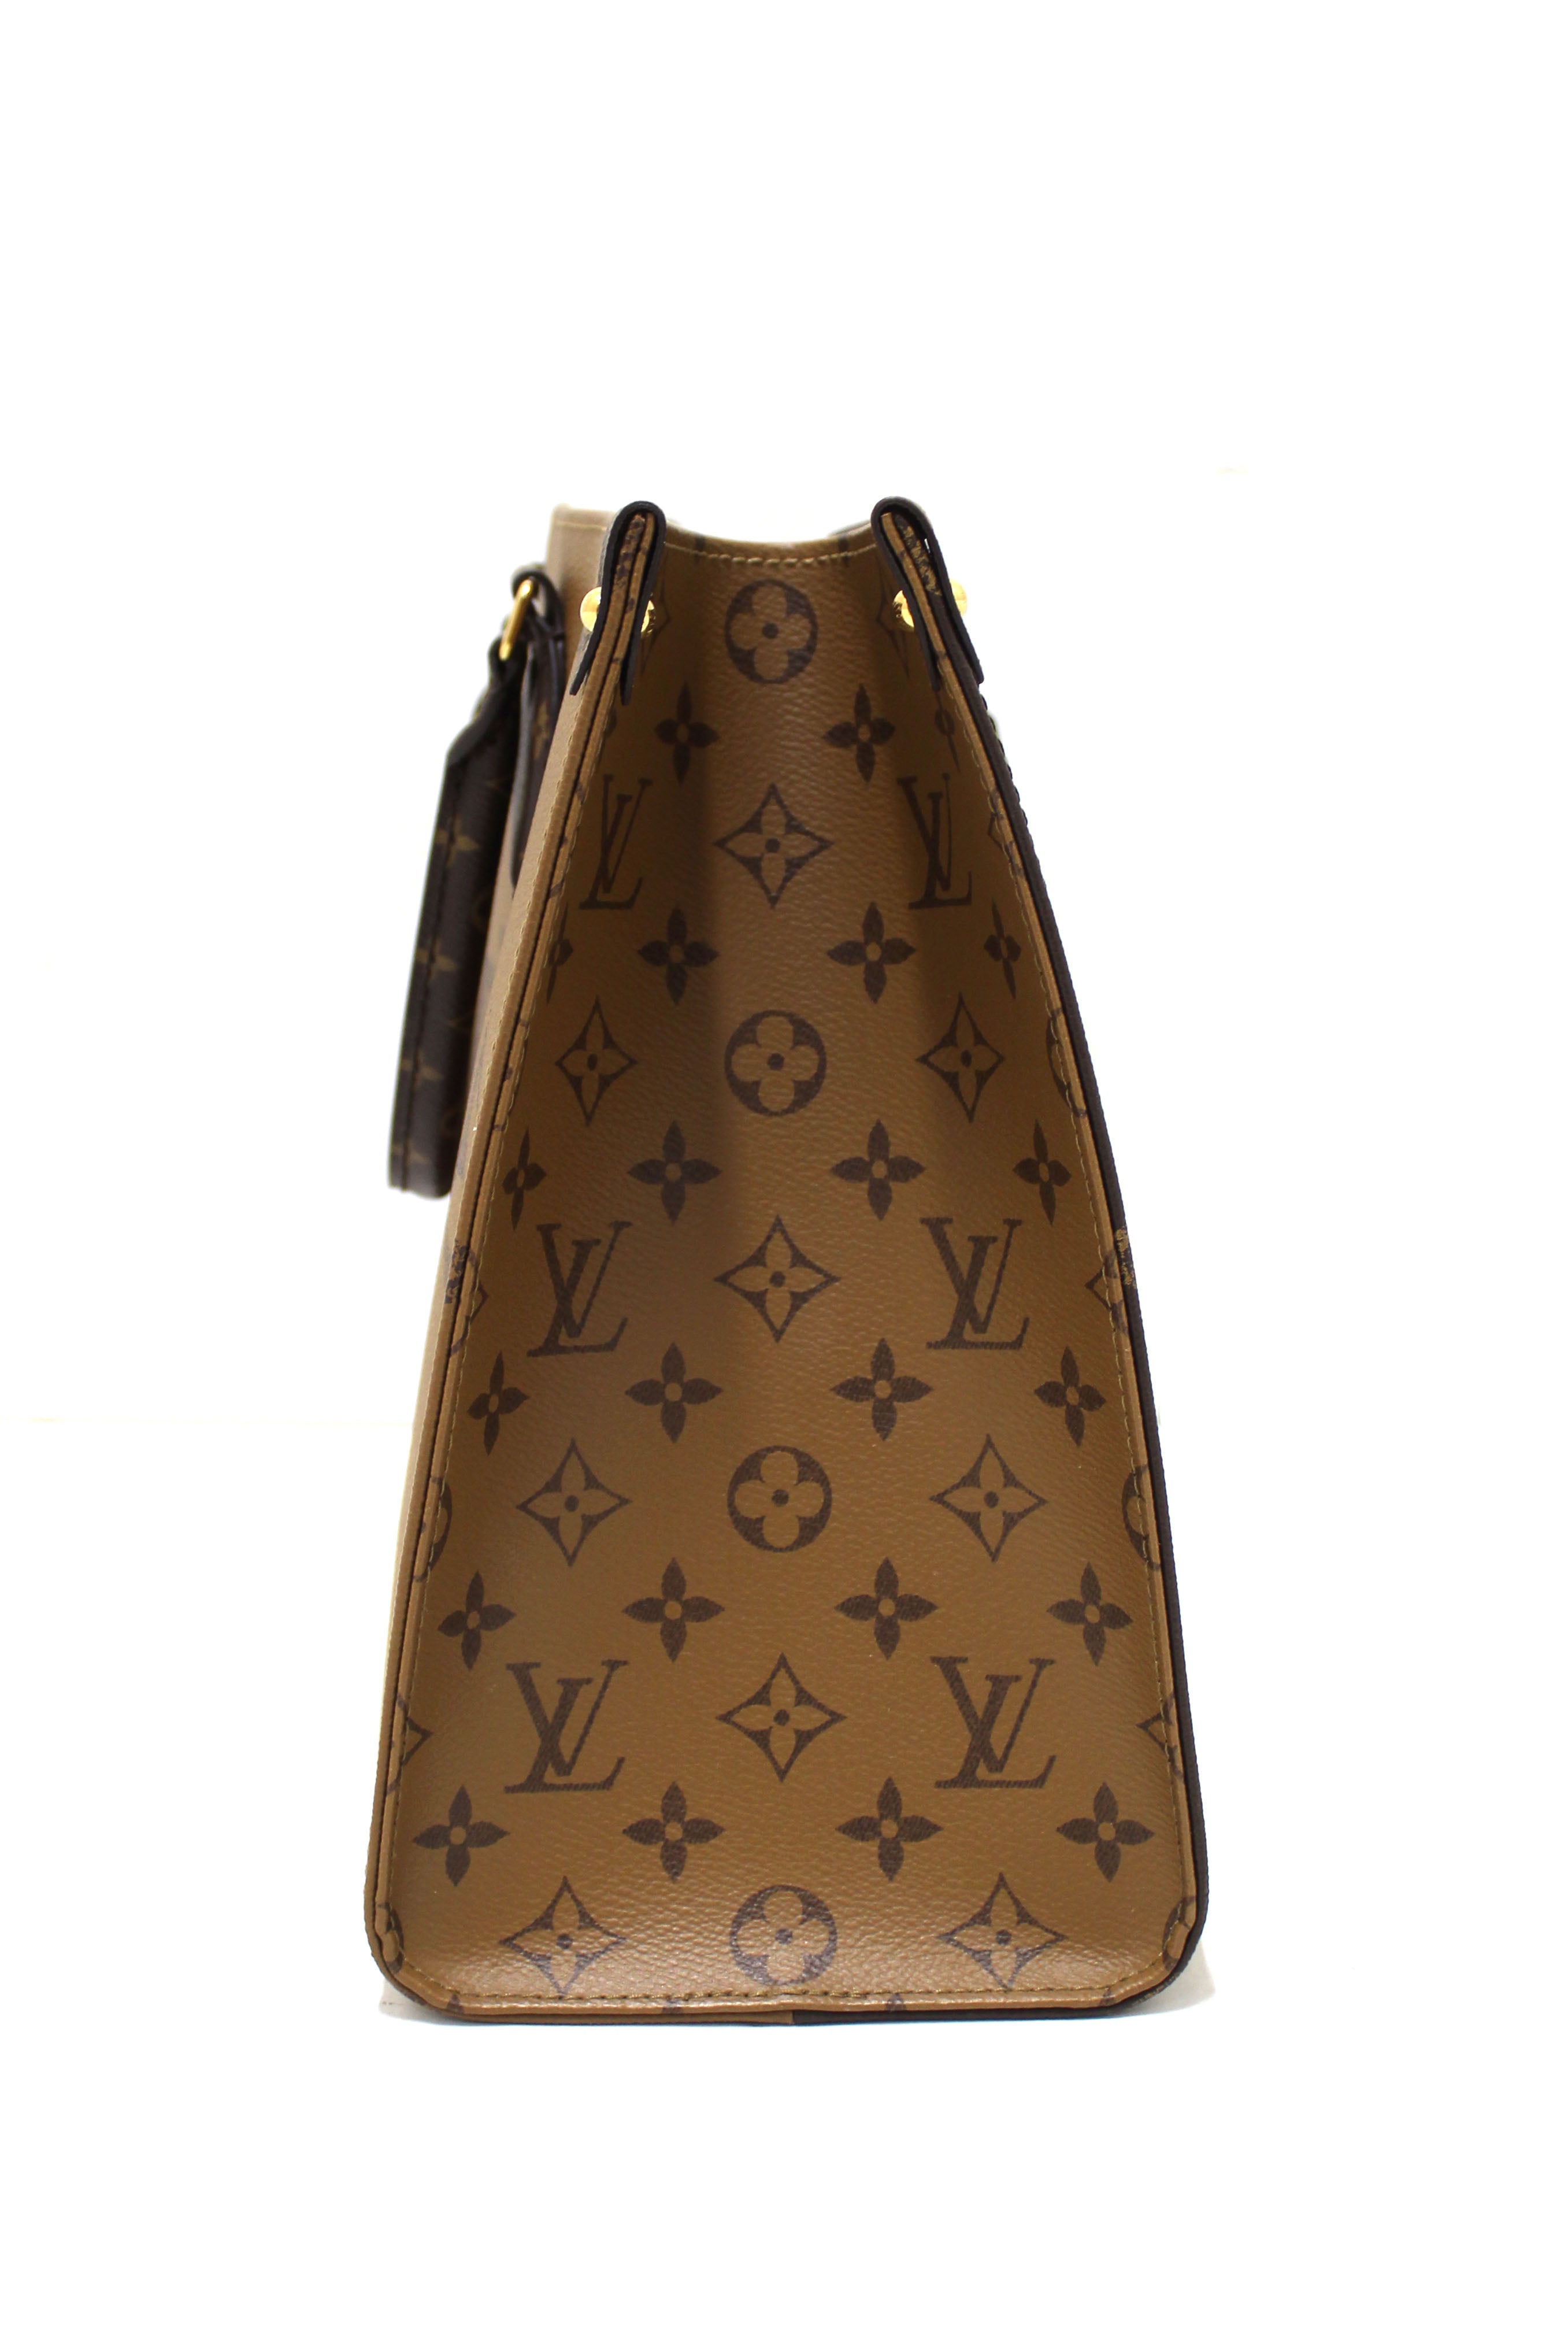 Authentic Louis Vuitton Giant Monogram Canvas OnTheGO MM Tote Bag